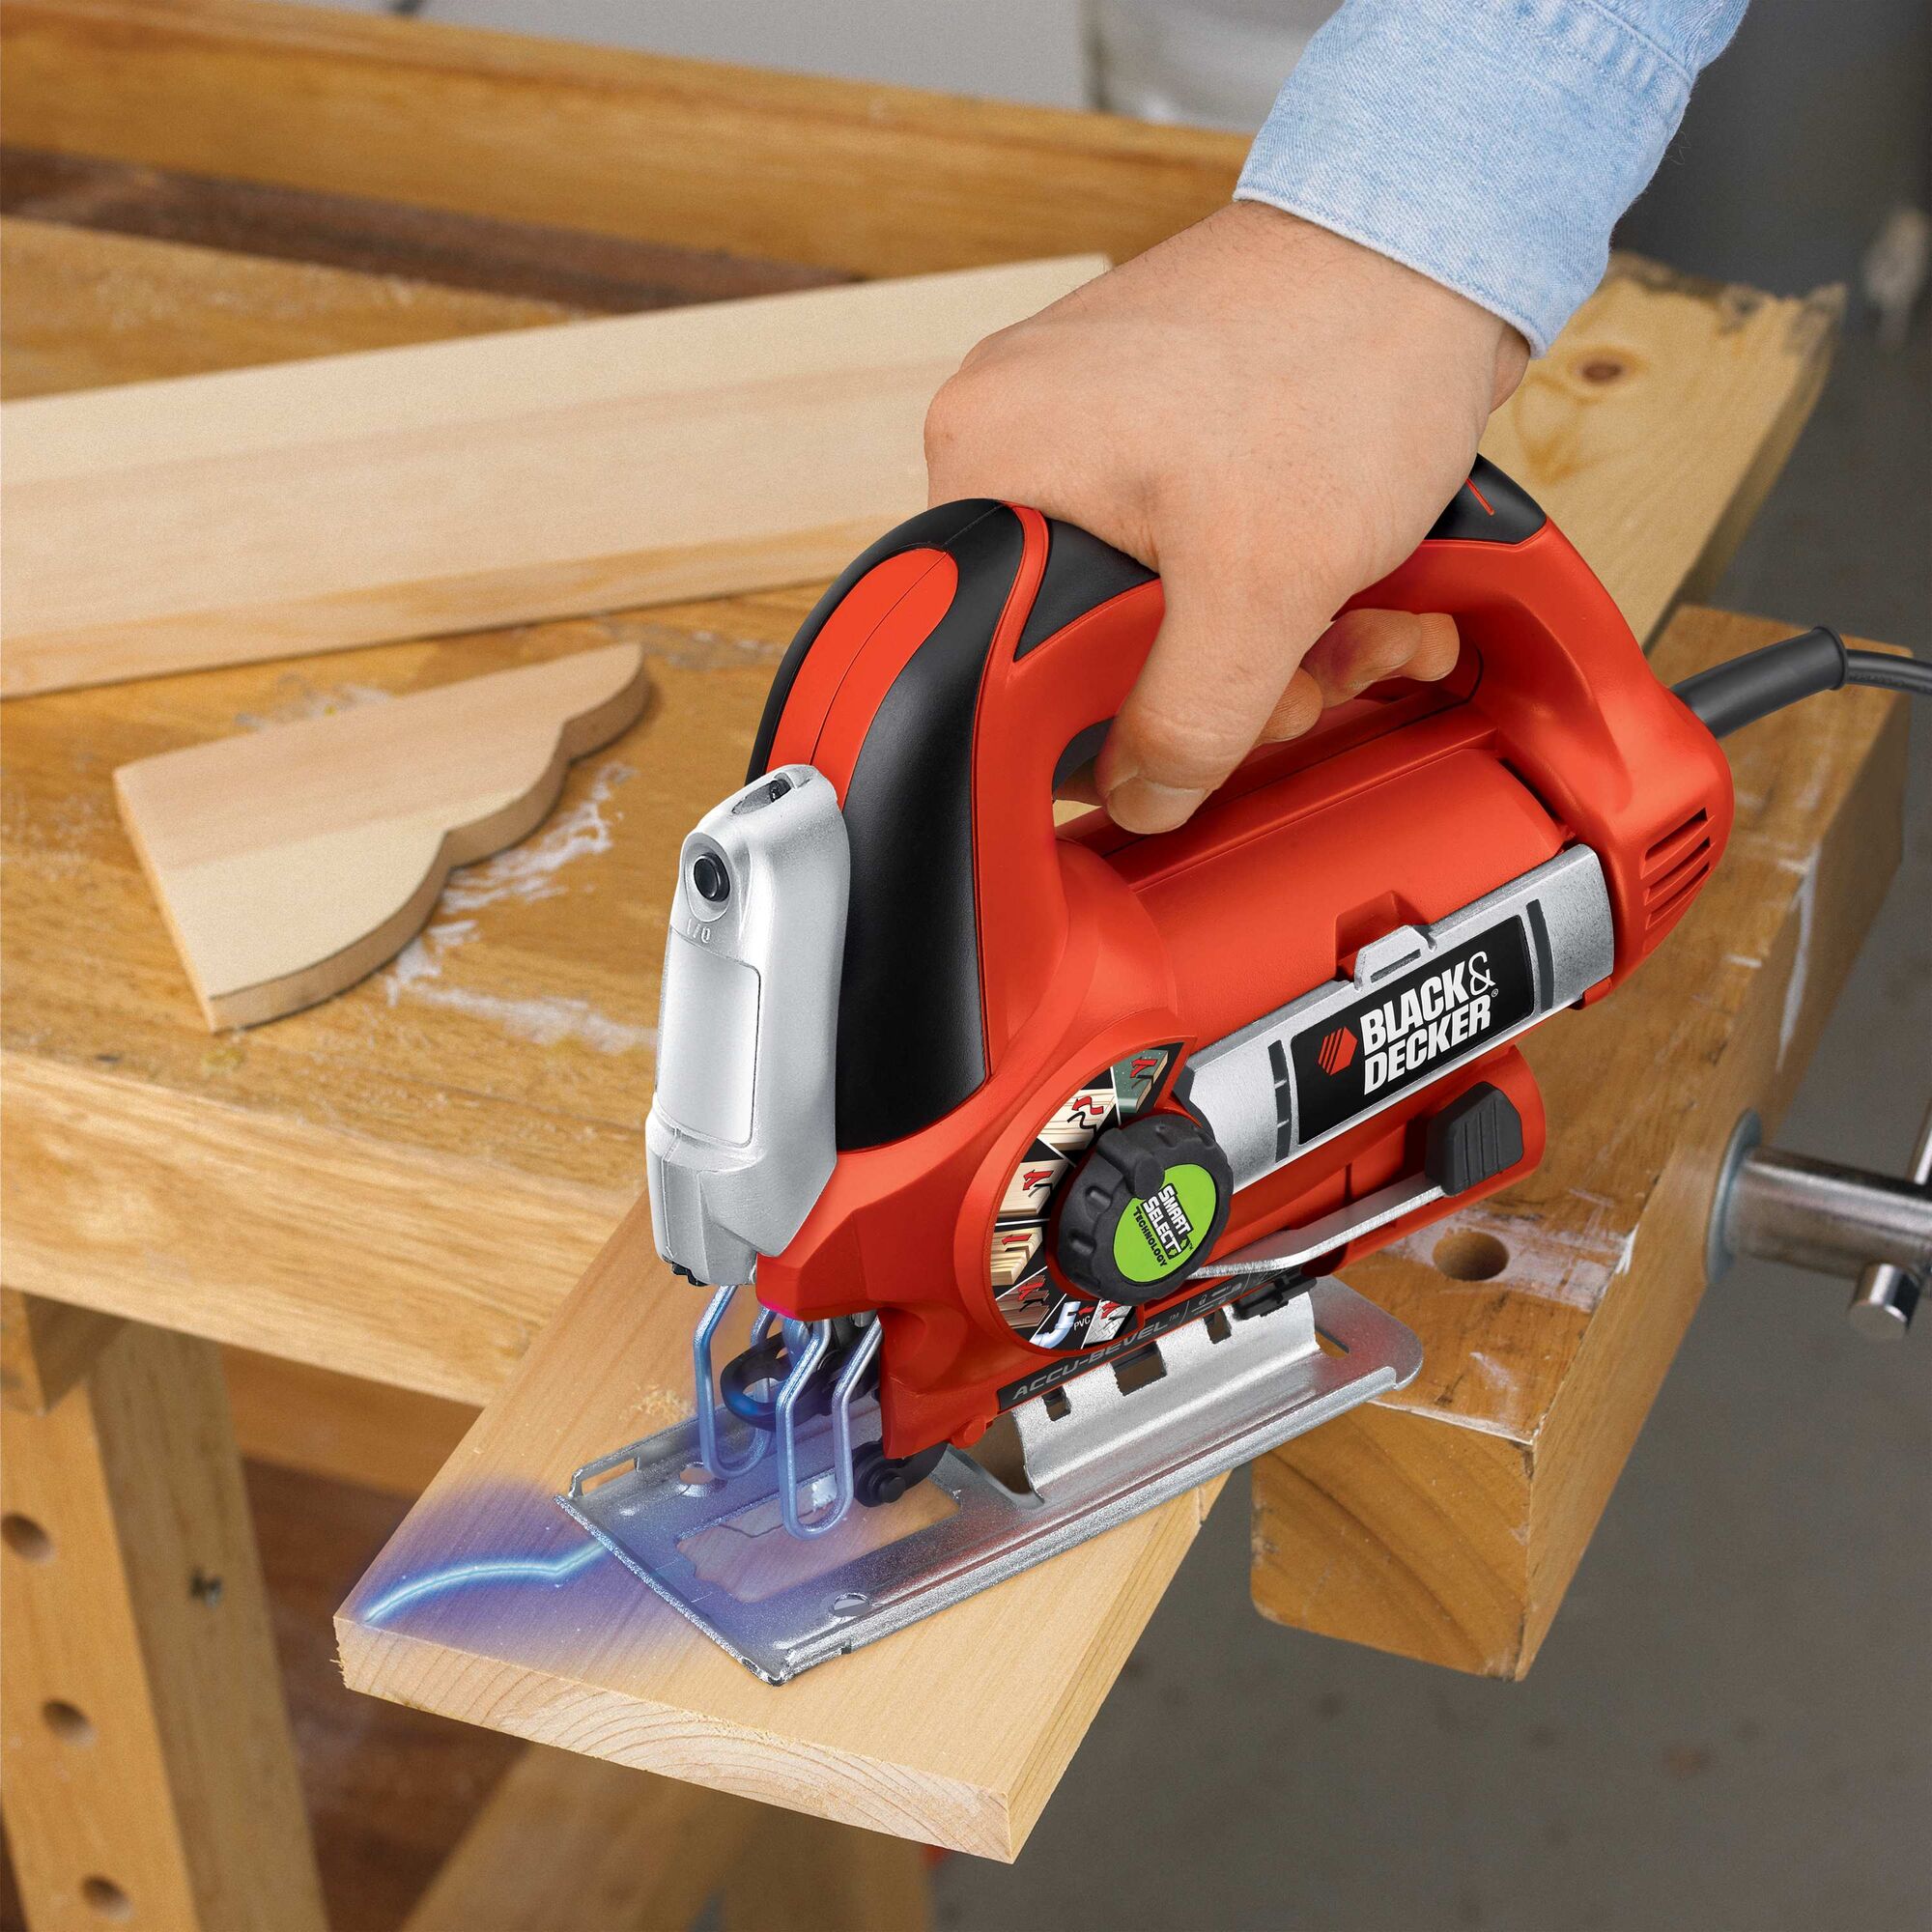 LINE FINDER 6 Amp Orbital Jigsaw with Smart Select Technology being used to cut wood.